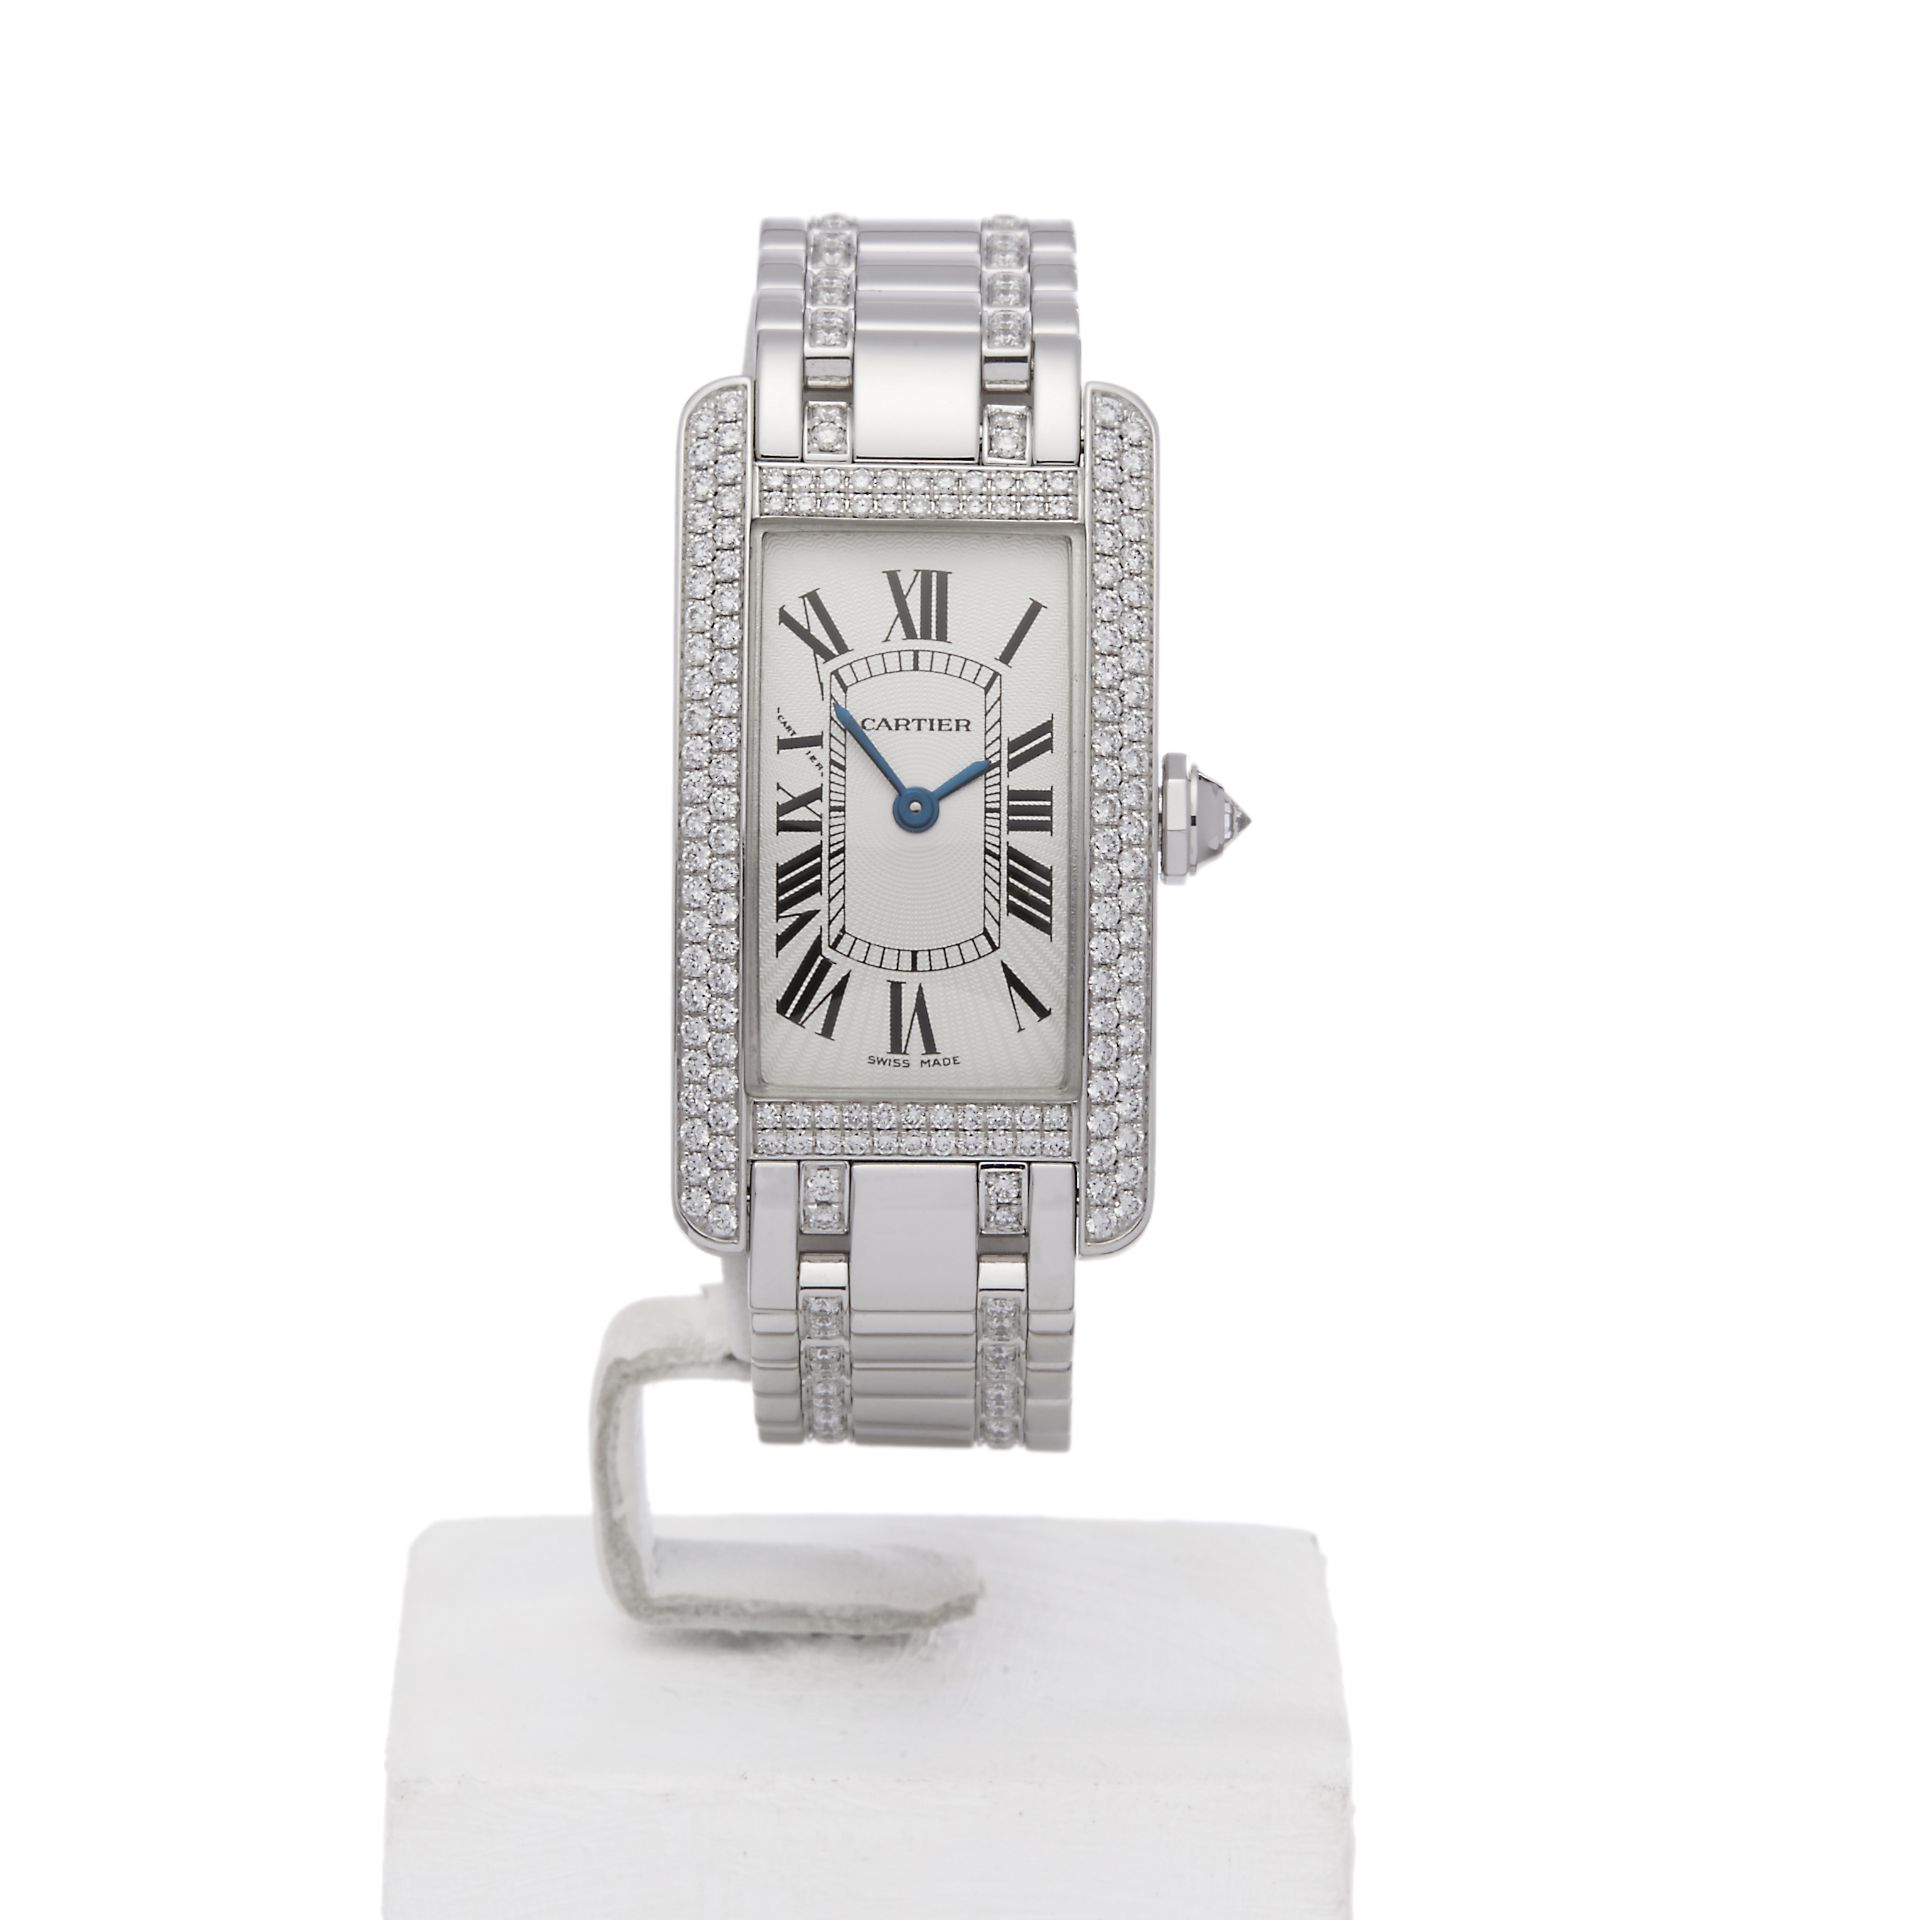 Cartier Tank Americaine 18k White Gold - 2489 - Image 2 of 8